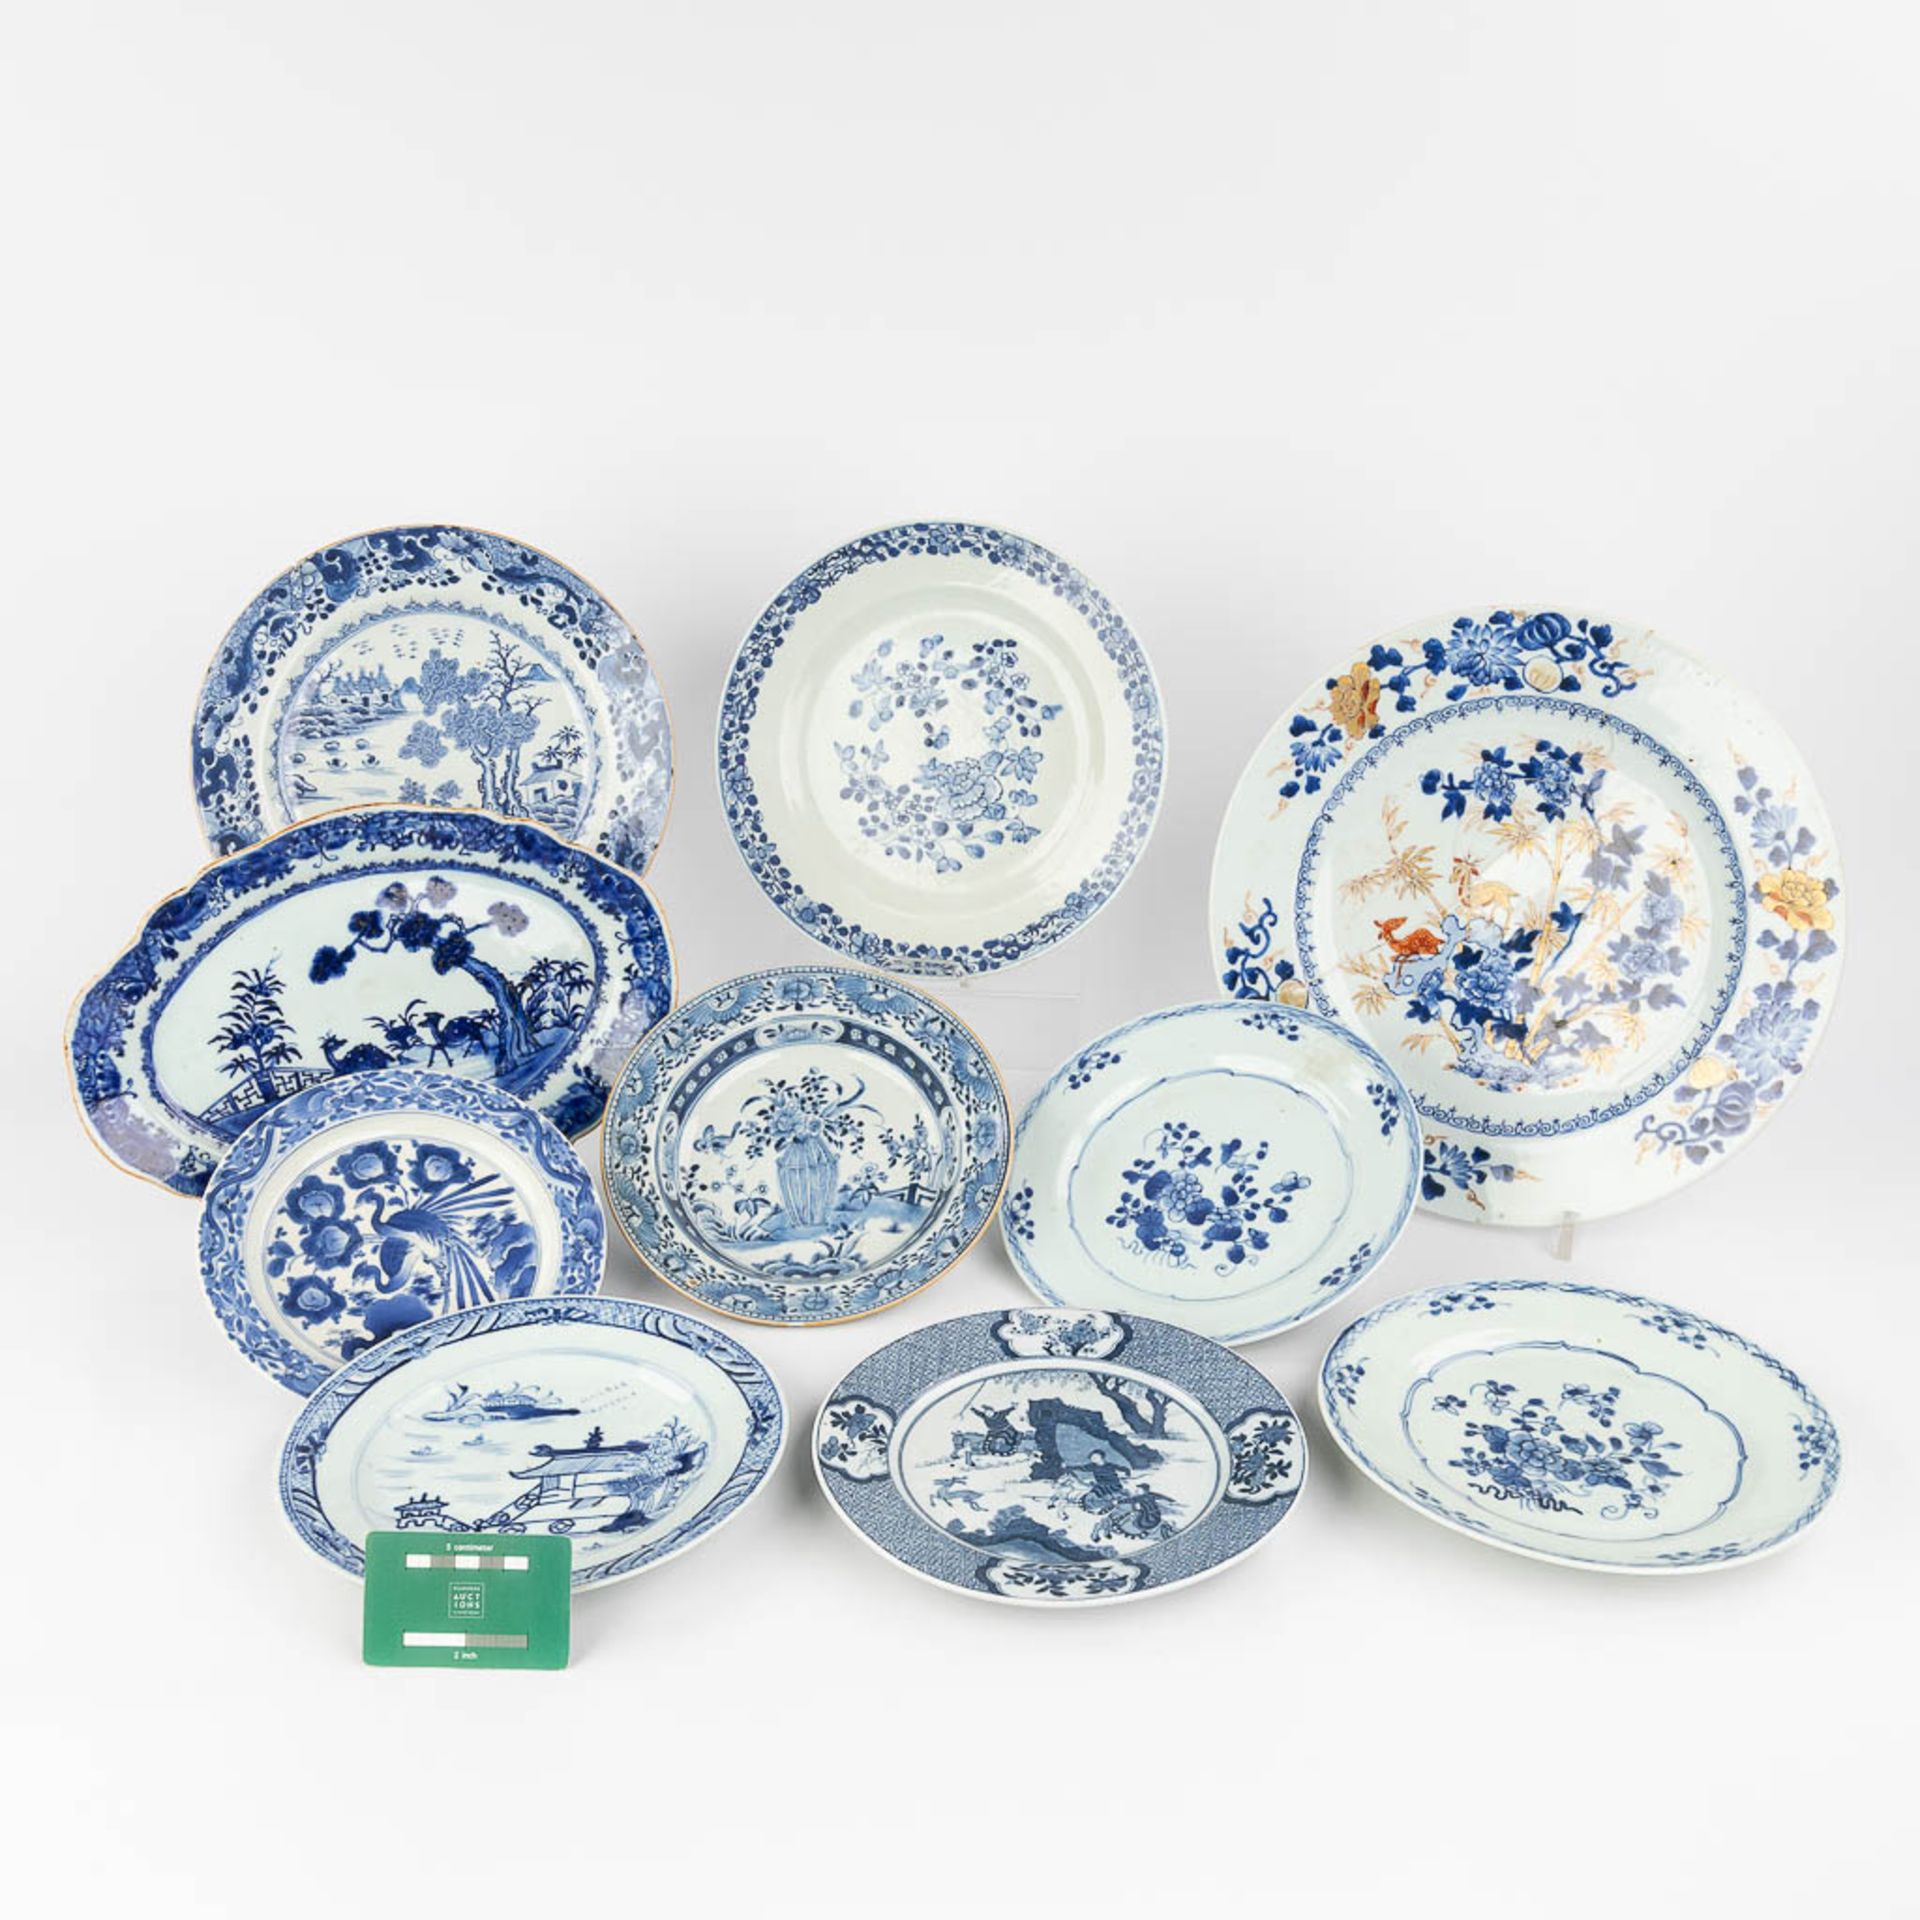 A collection of 10 Chinese porcelain plates with blue-white decor. 19th/20th century. (D: 35 cm) - Bild 2 aus 23